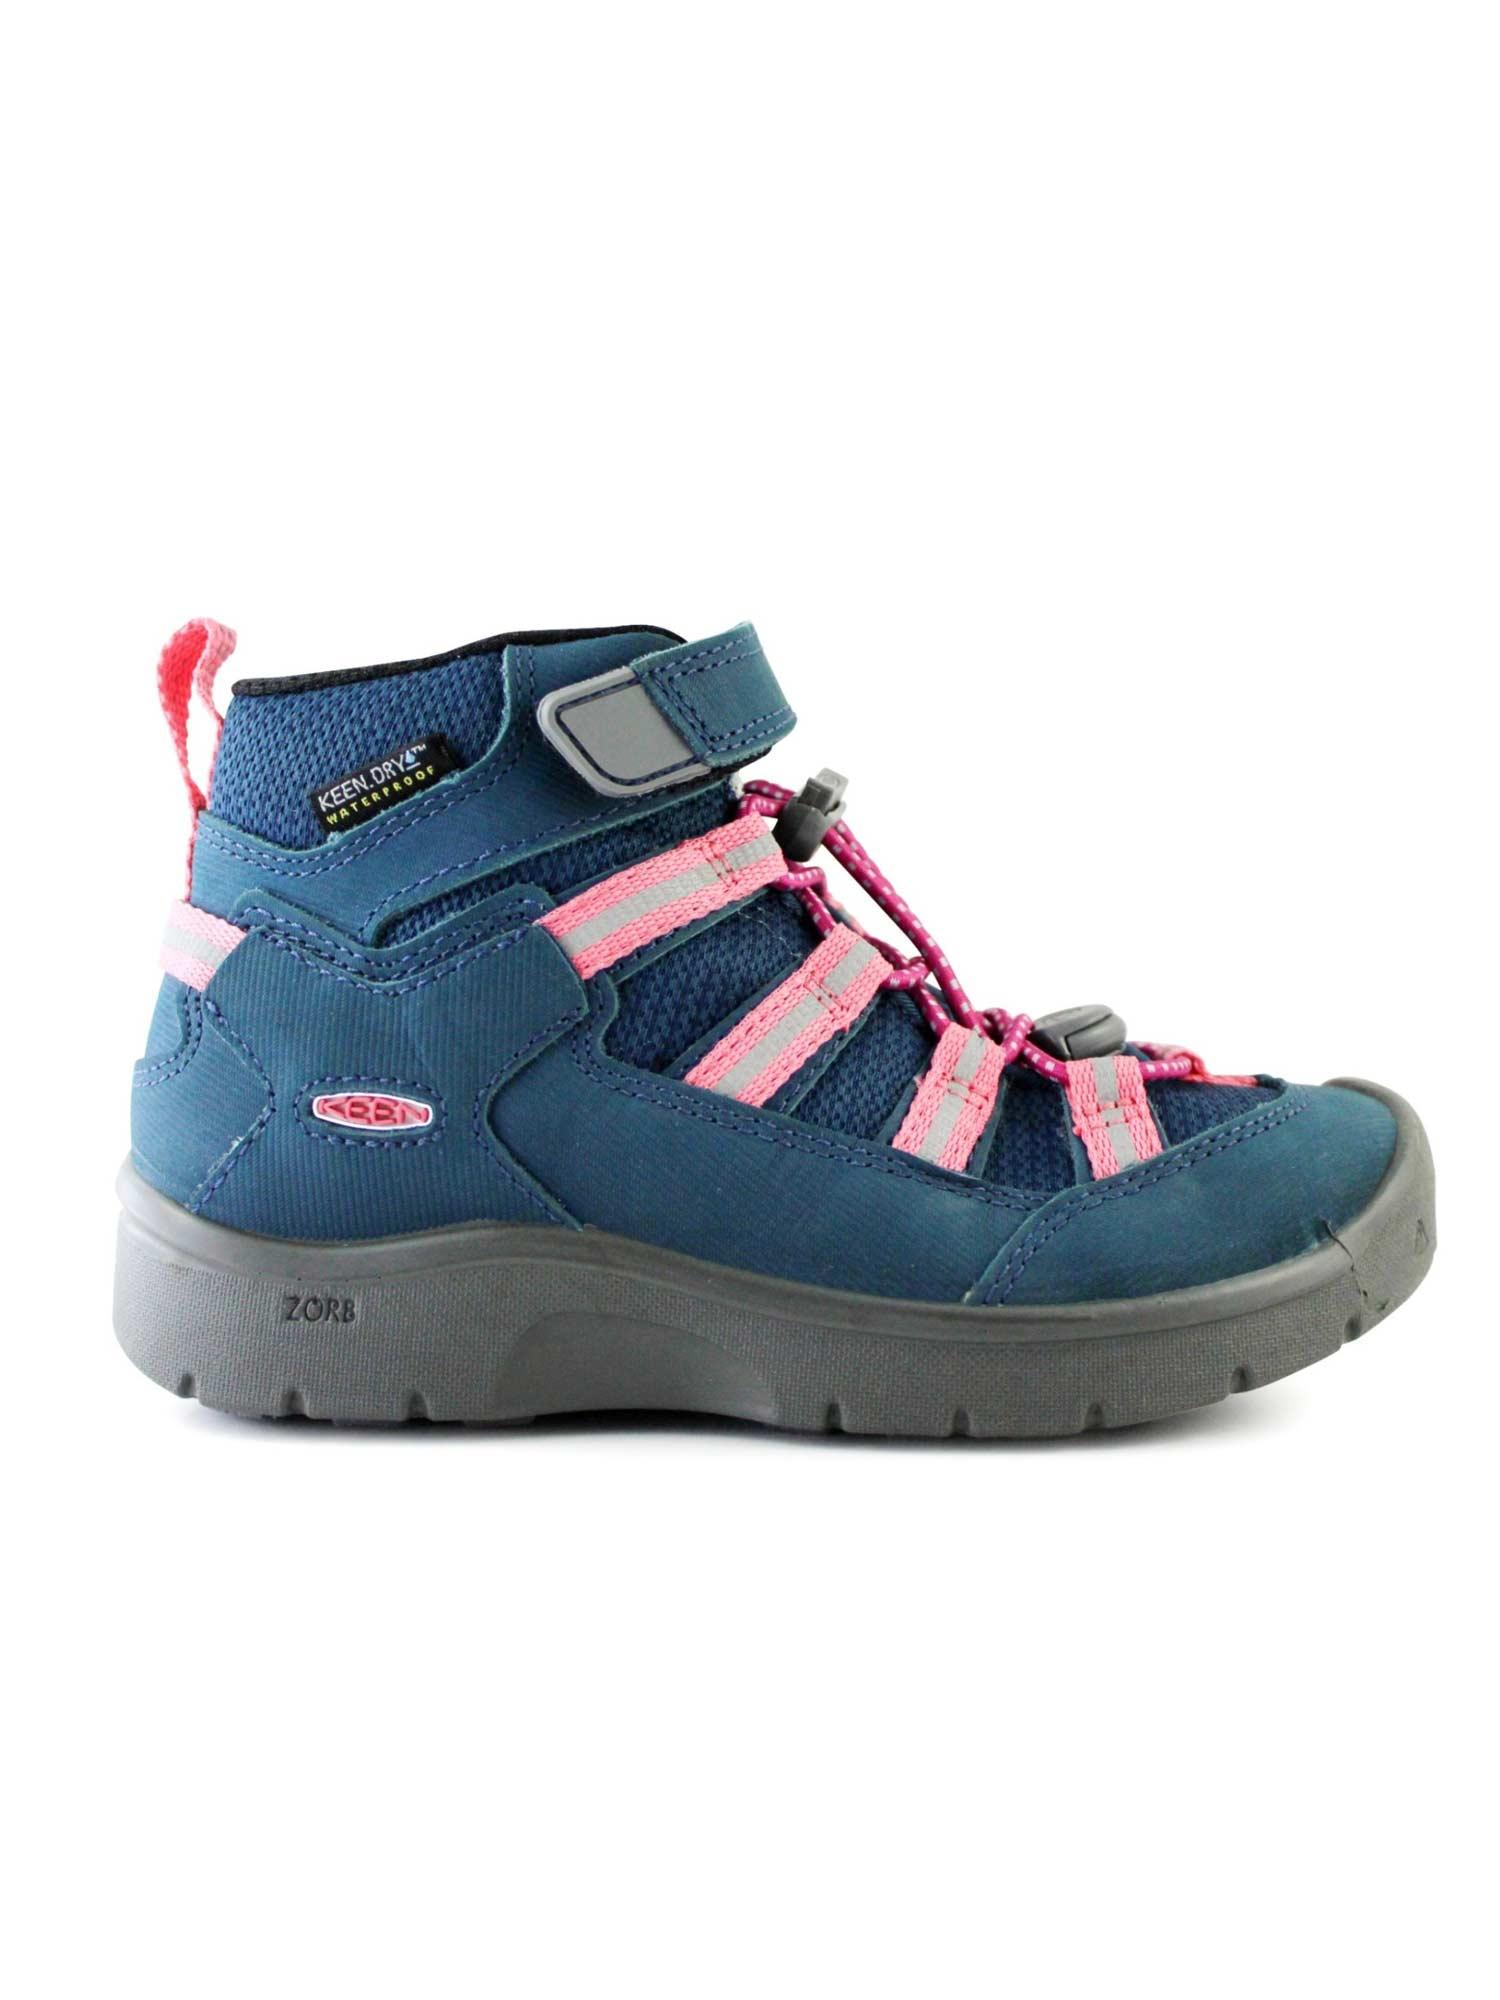 KEEN HIKEPORT 2 SPORT MID WP YOUTH Boots dečije plave